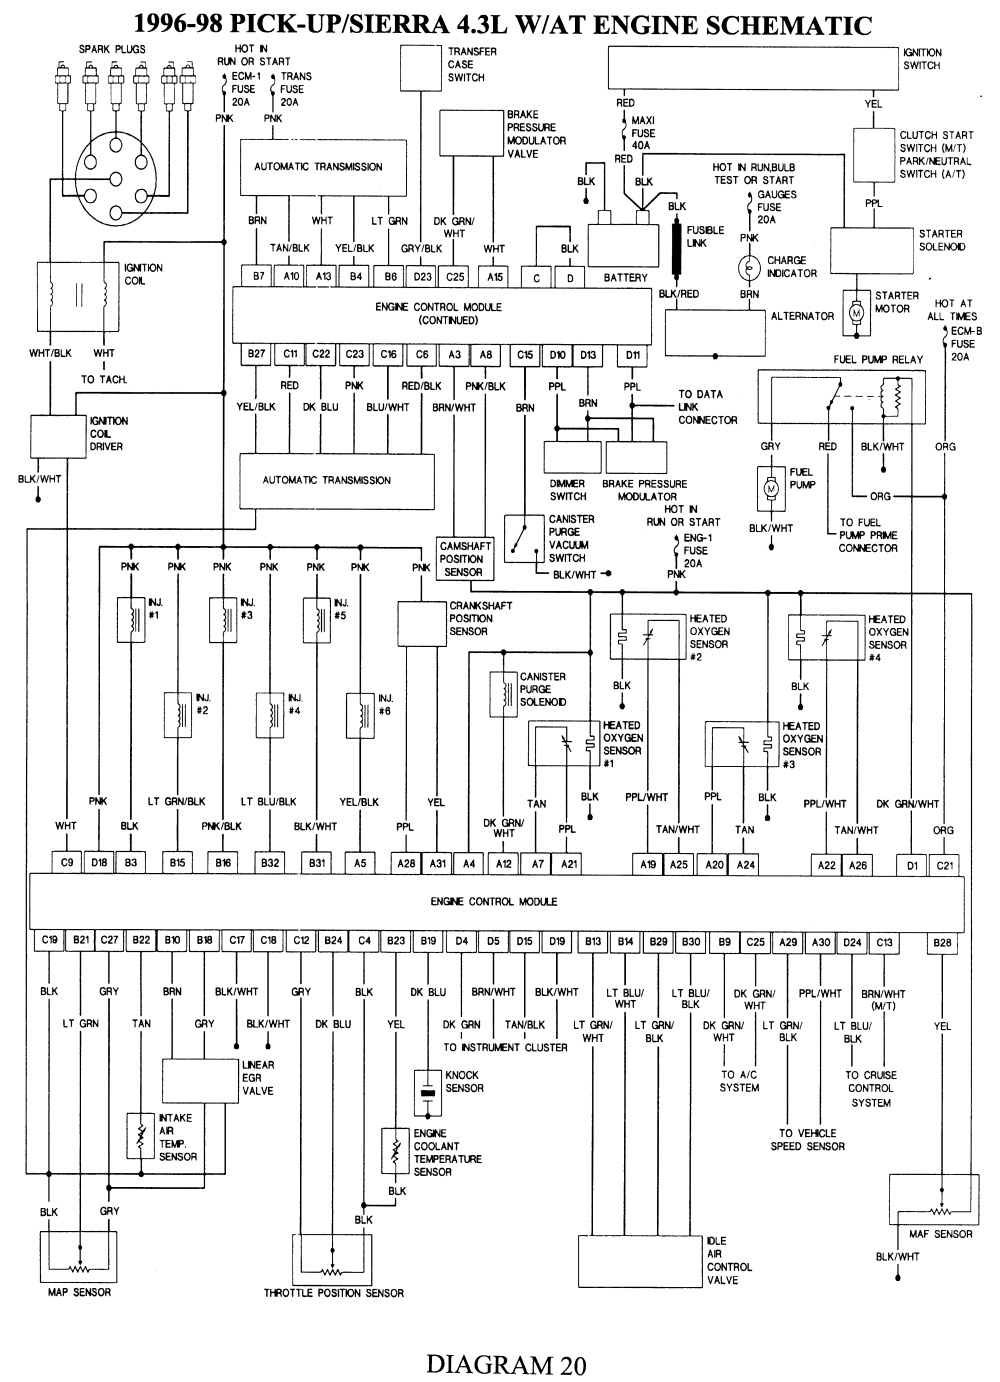 1995 Chevy 1500 Ignition Wiring